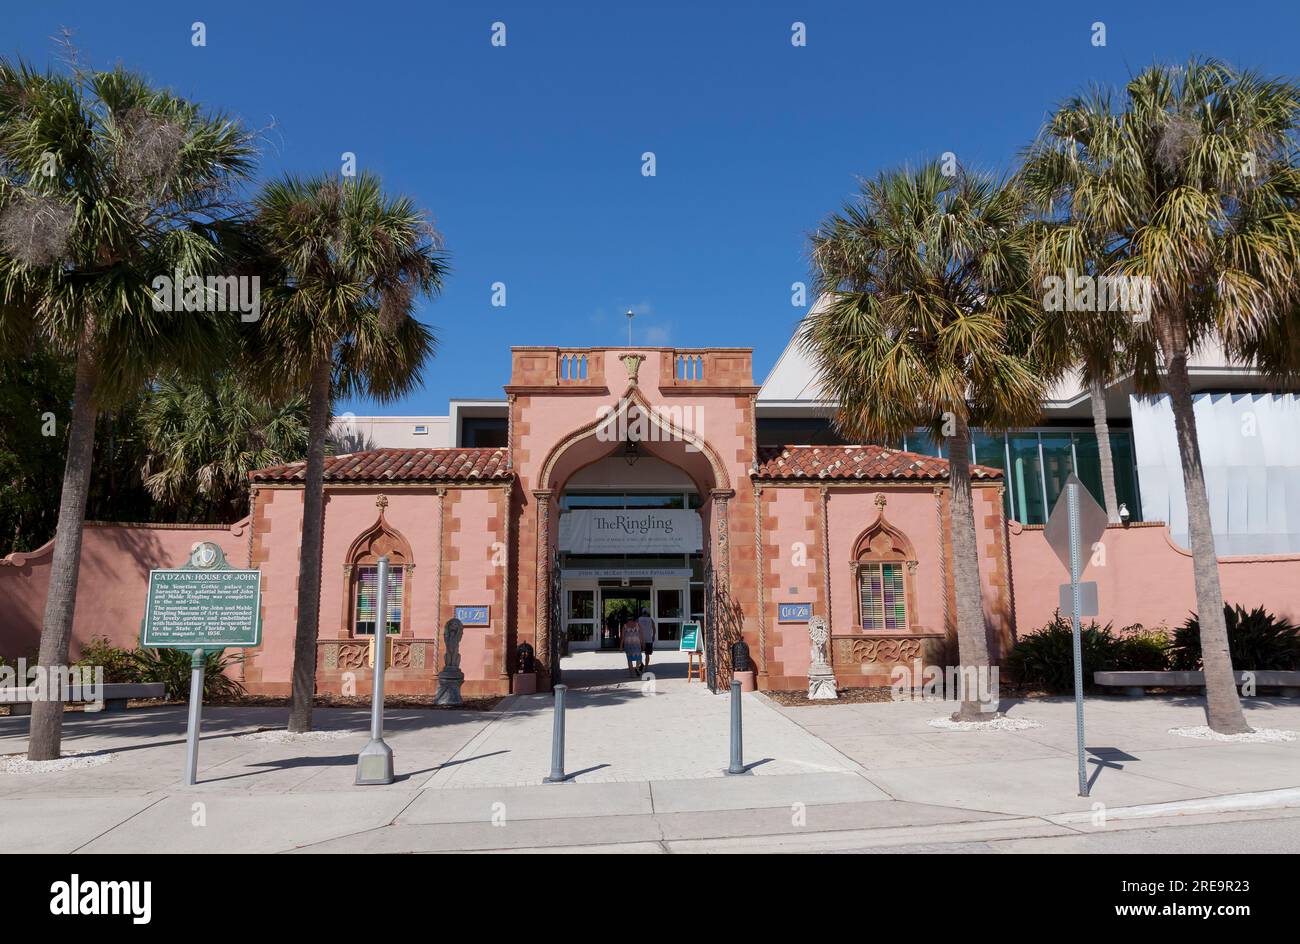 Cadzan or Ca' d'Zan [House of John] entrance to John & Mable Ringling Museum of Art Estate grounds in Sarasota, Florida, United States. Stock Photo